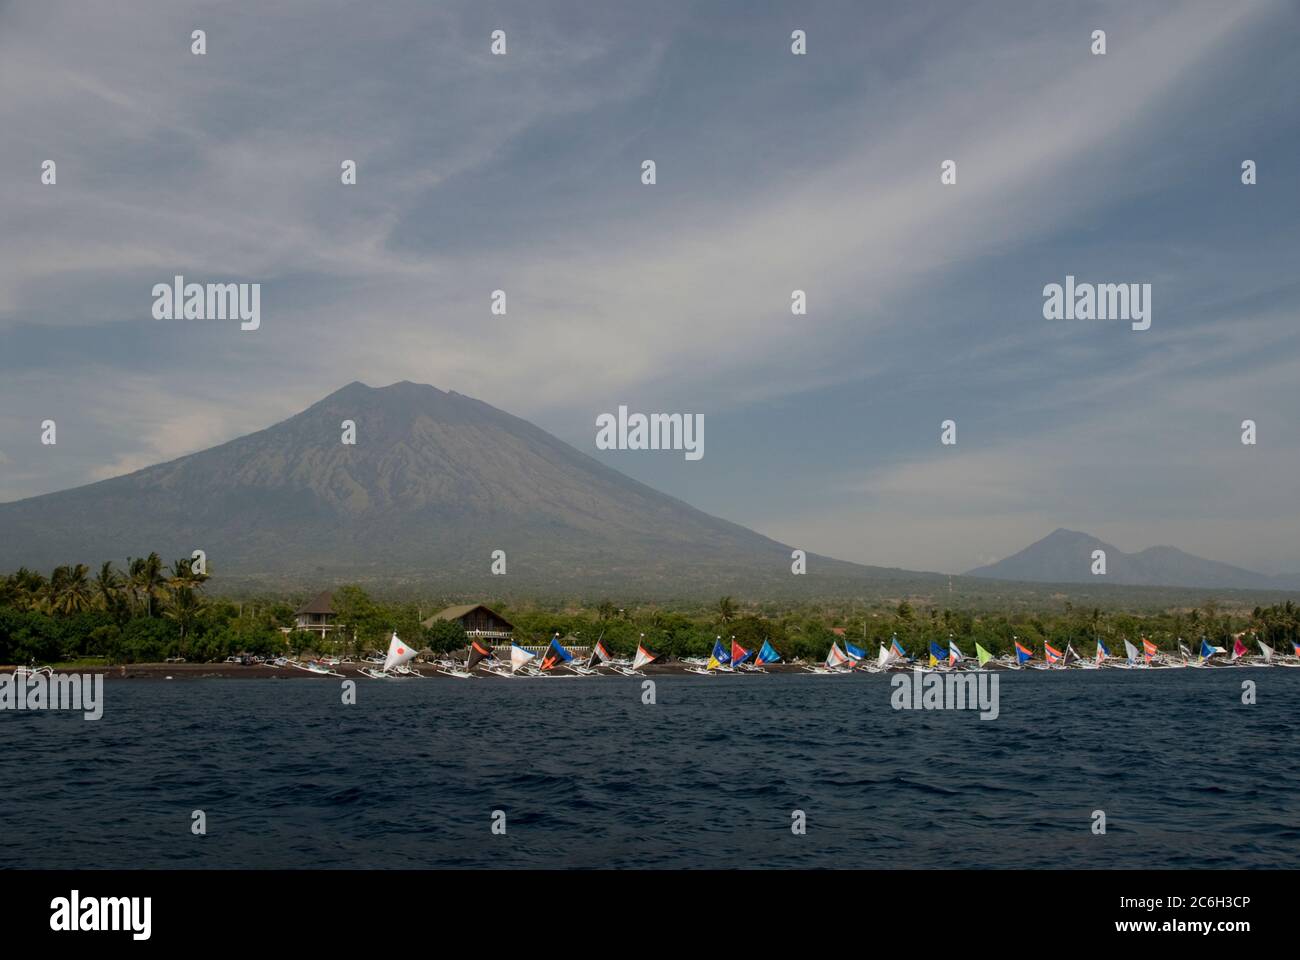 Boats on beach with colourful sails with Mount Agung volcano in background, Tulamben, Bali, Indonesia Stock Photo